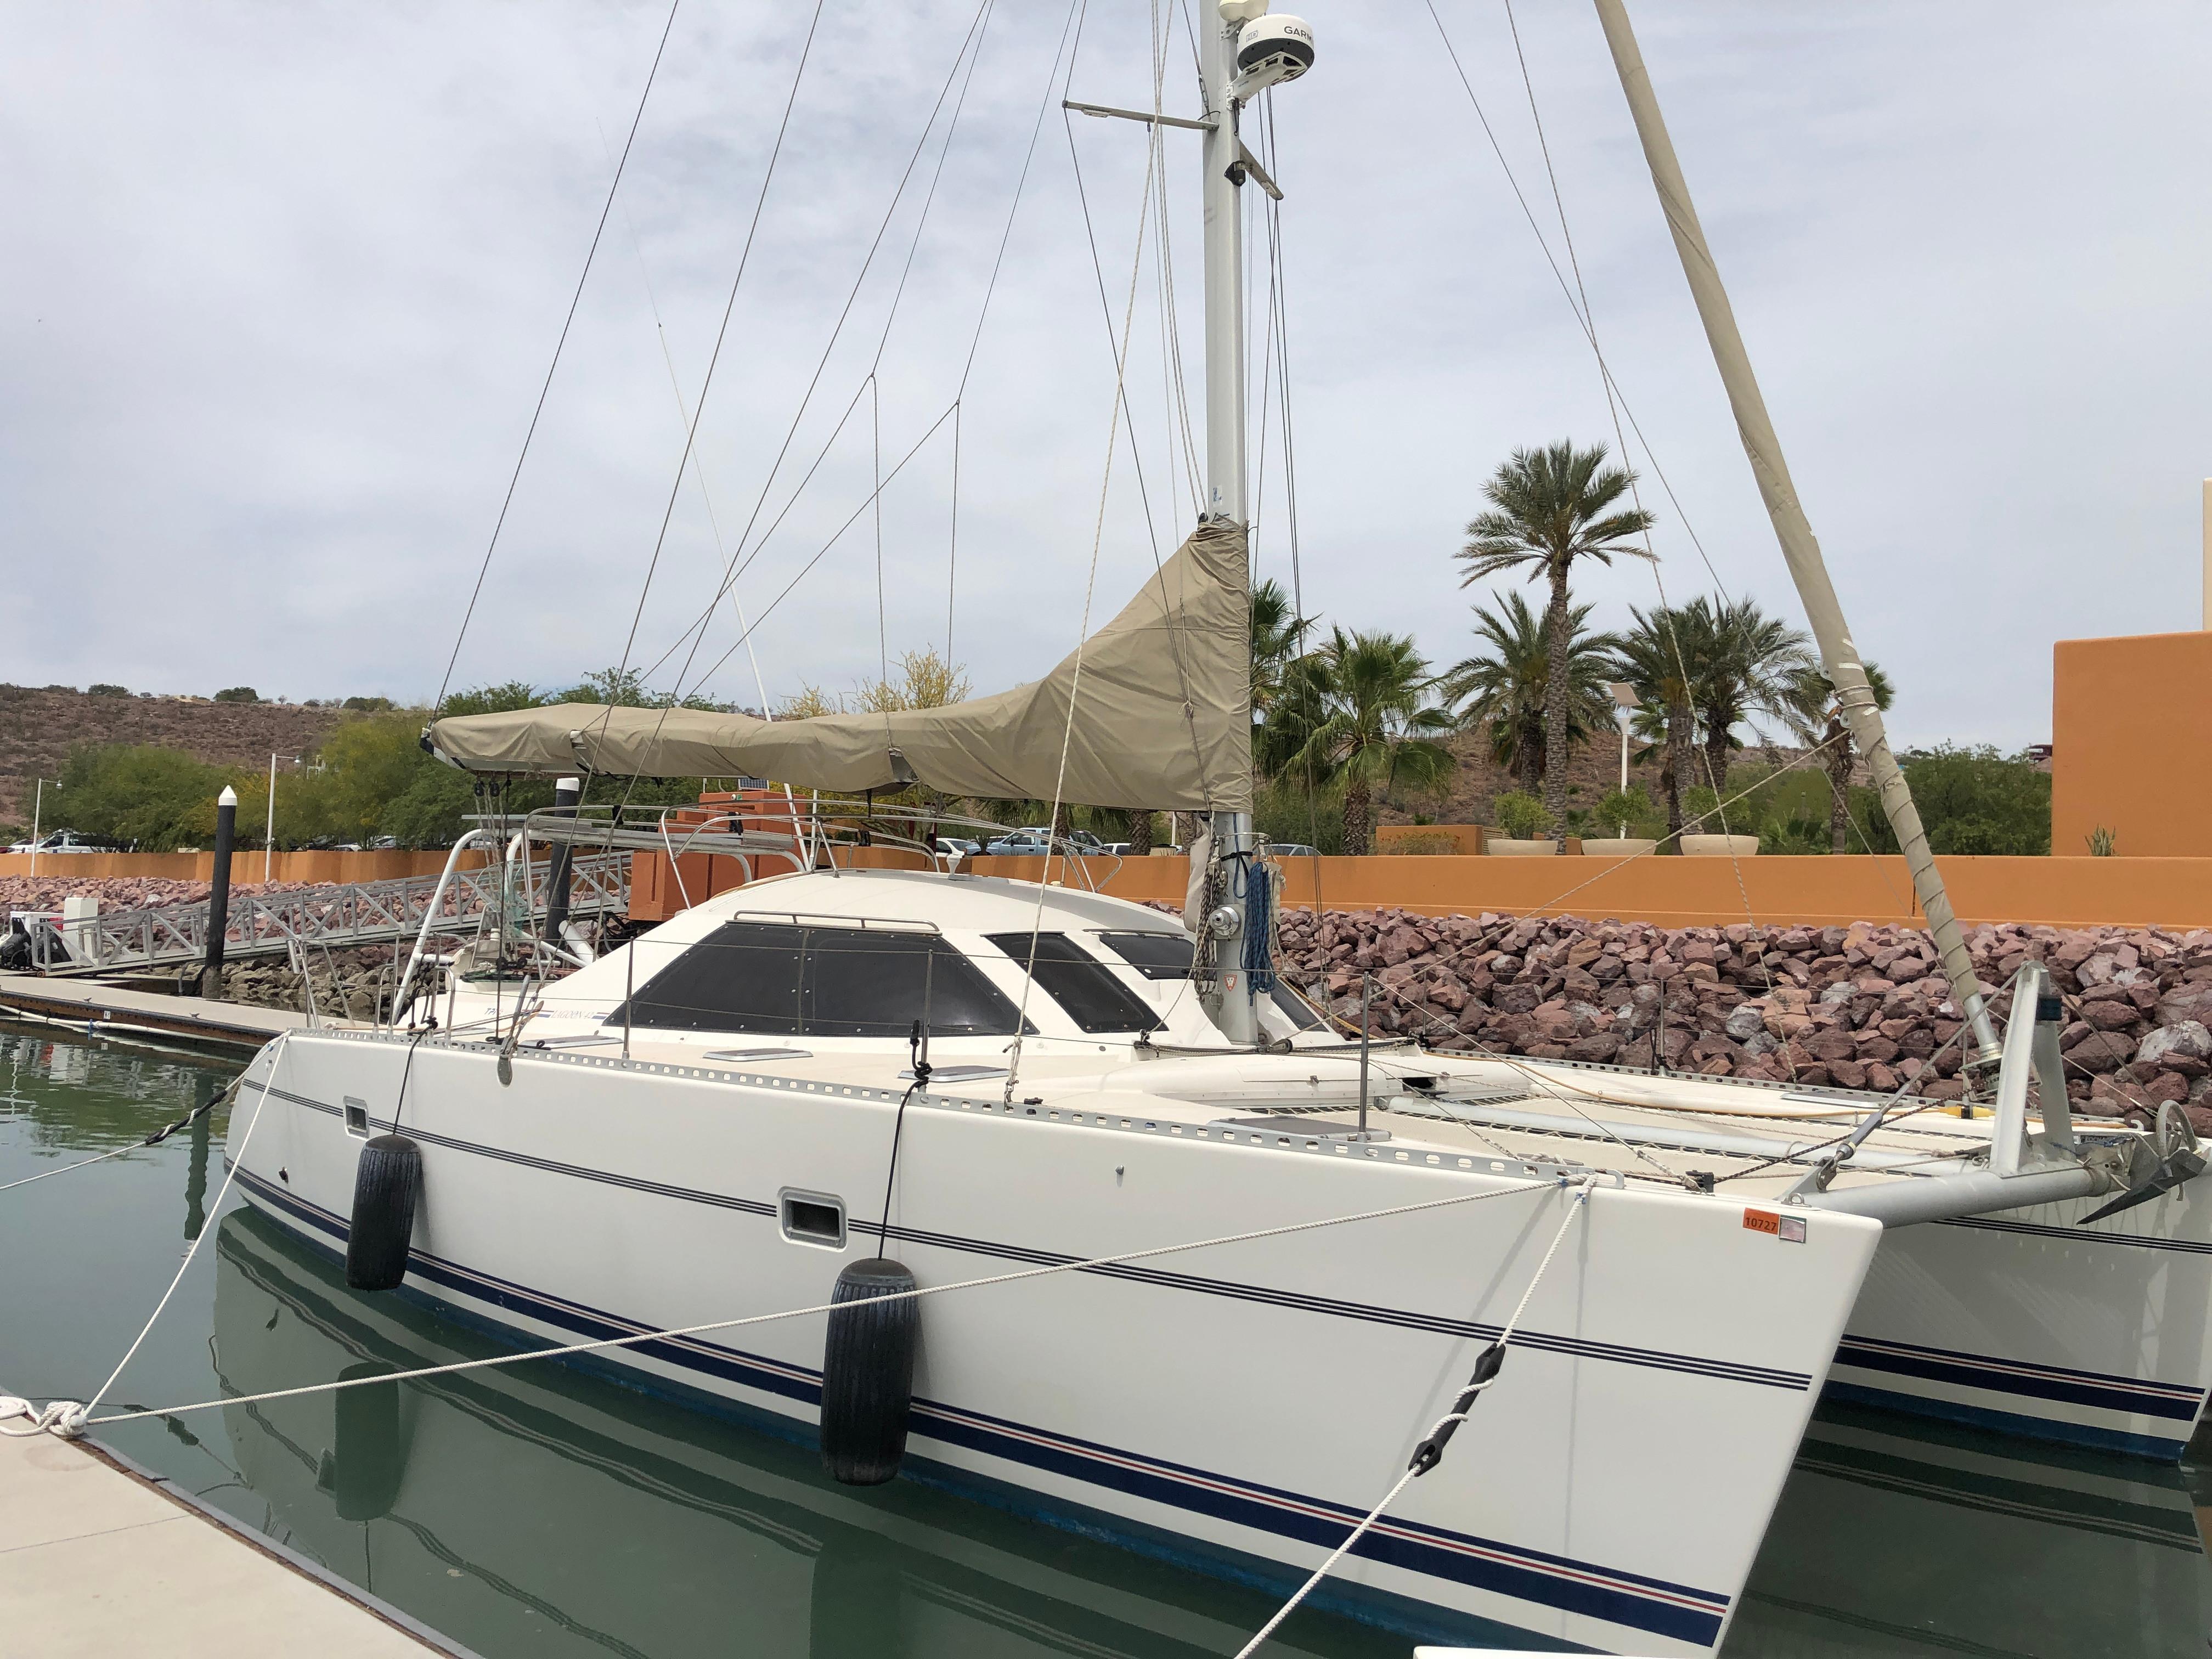 42 Lagoon 1994 Swell La Paz Mexico Sold On 2019 06 05 By Denison Yacht Sales